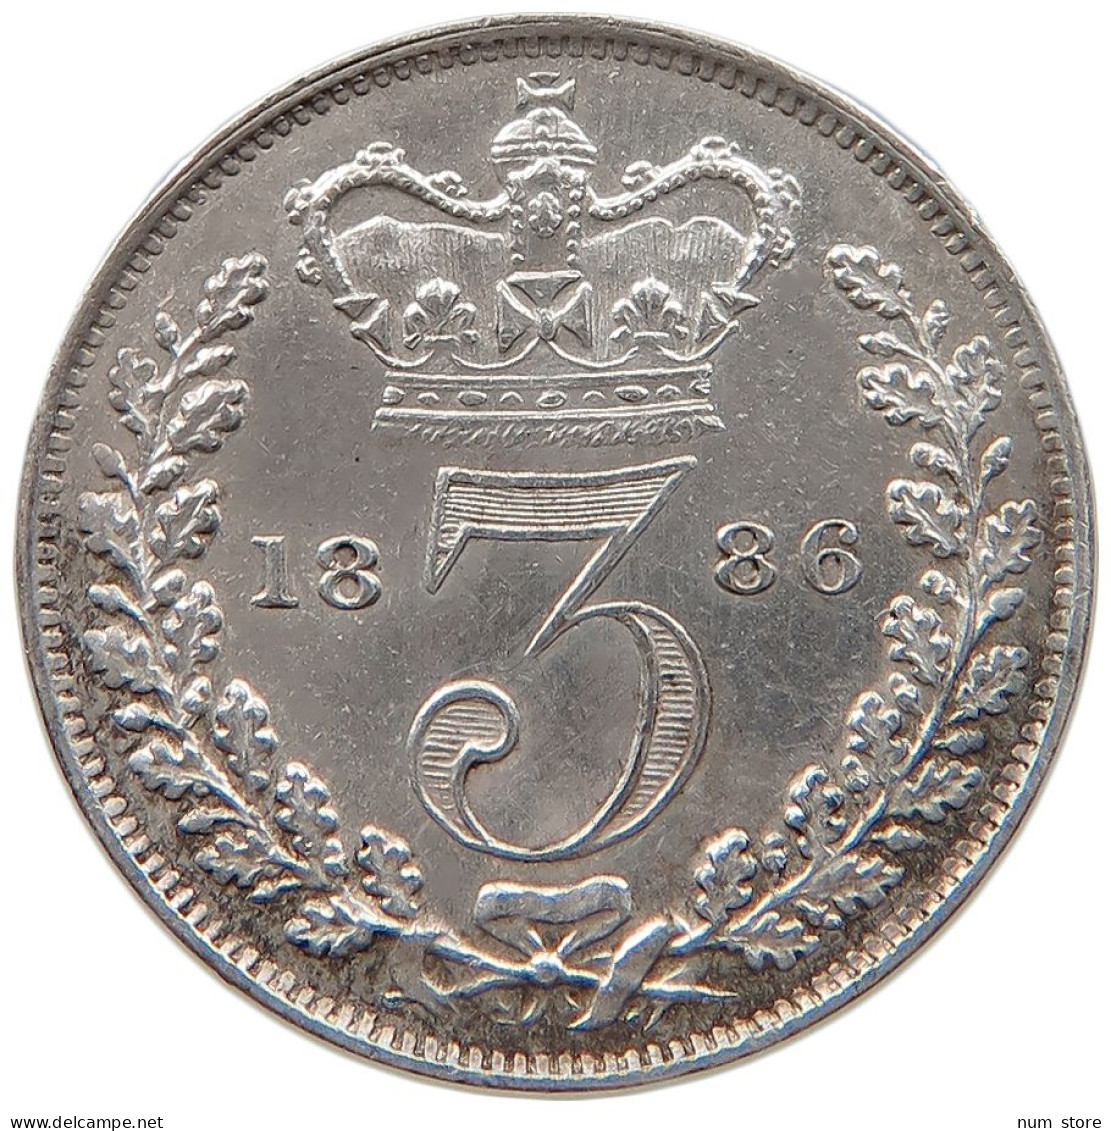 GREAT BRITAIN THREEPENCE 1886 Victoria 1837-1901 #t143 0629 - F. 3 Pence